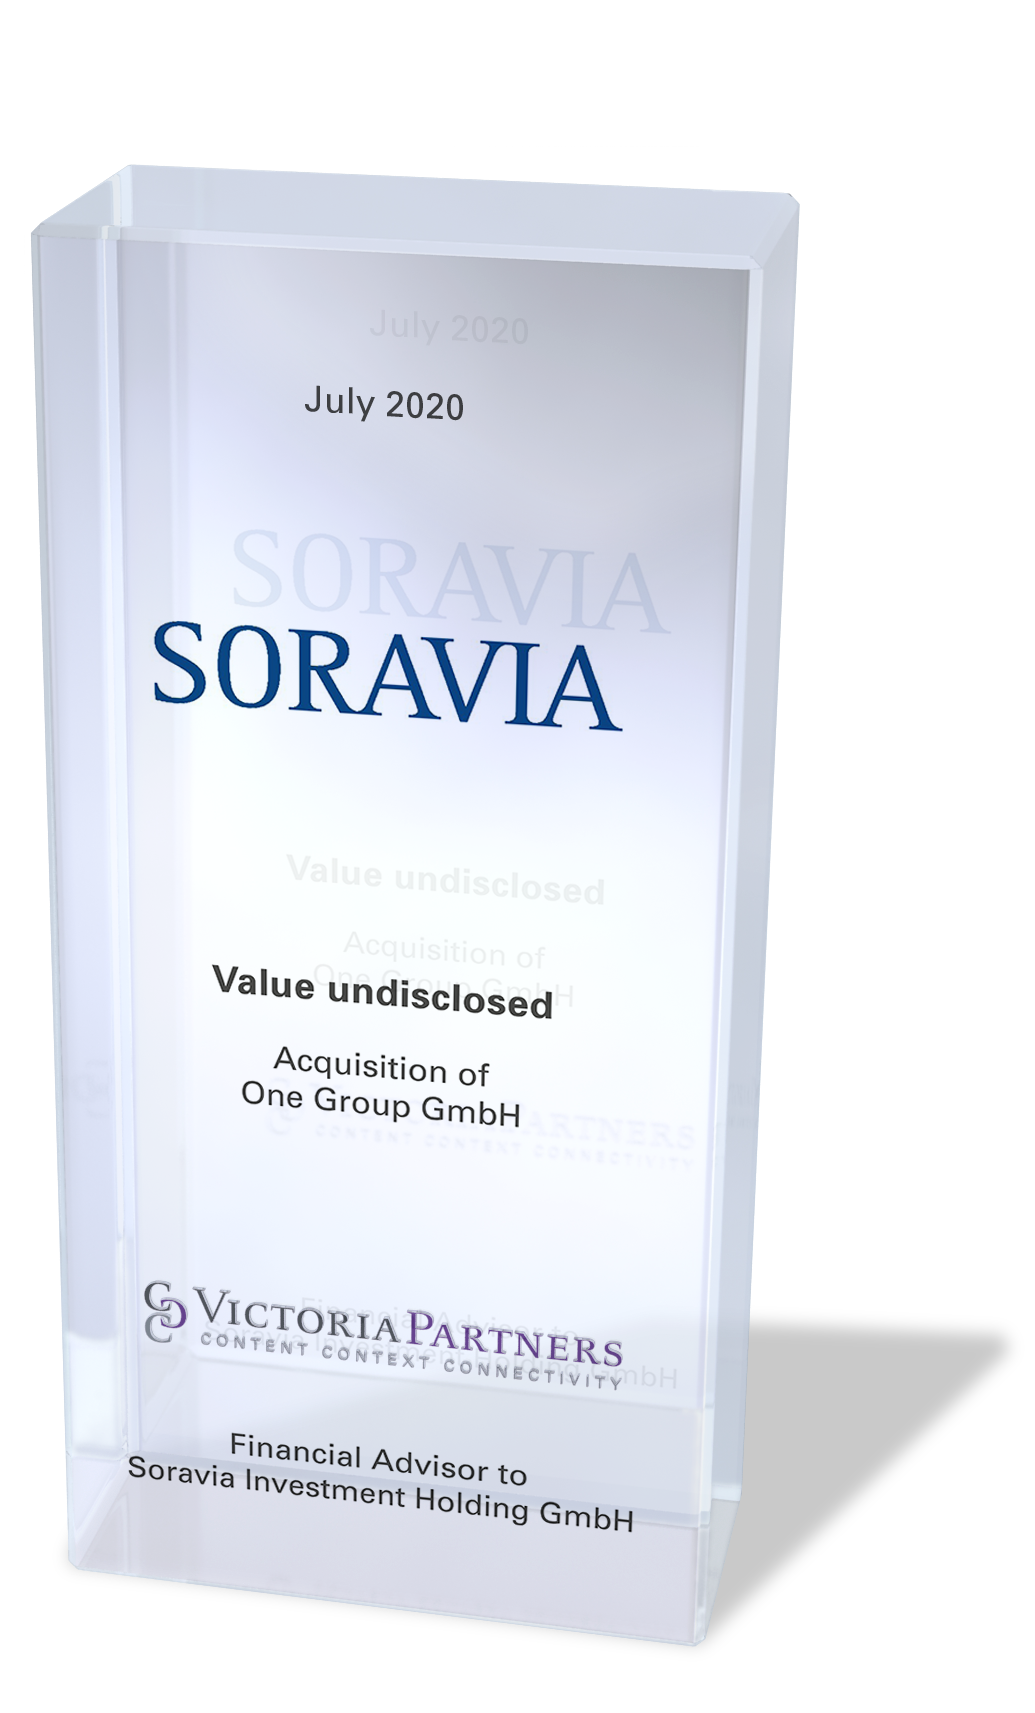 VICTORIAPARTNERS - Financial Advisor to Soravia Investment Holding GmbH - July 2020